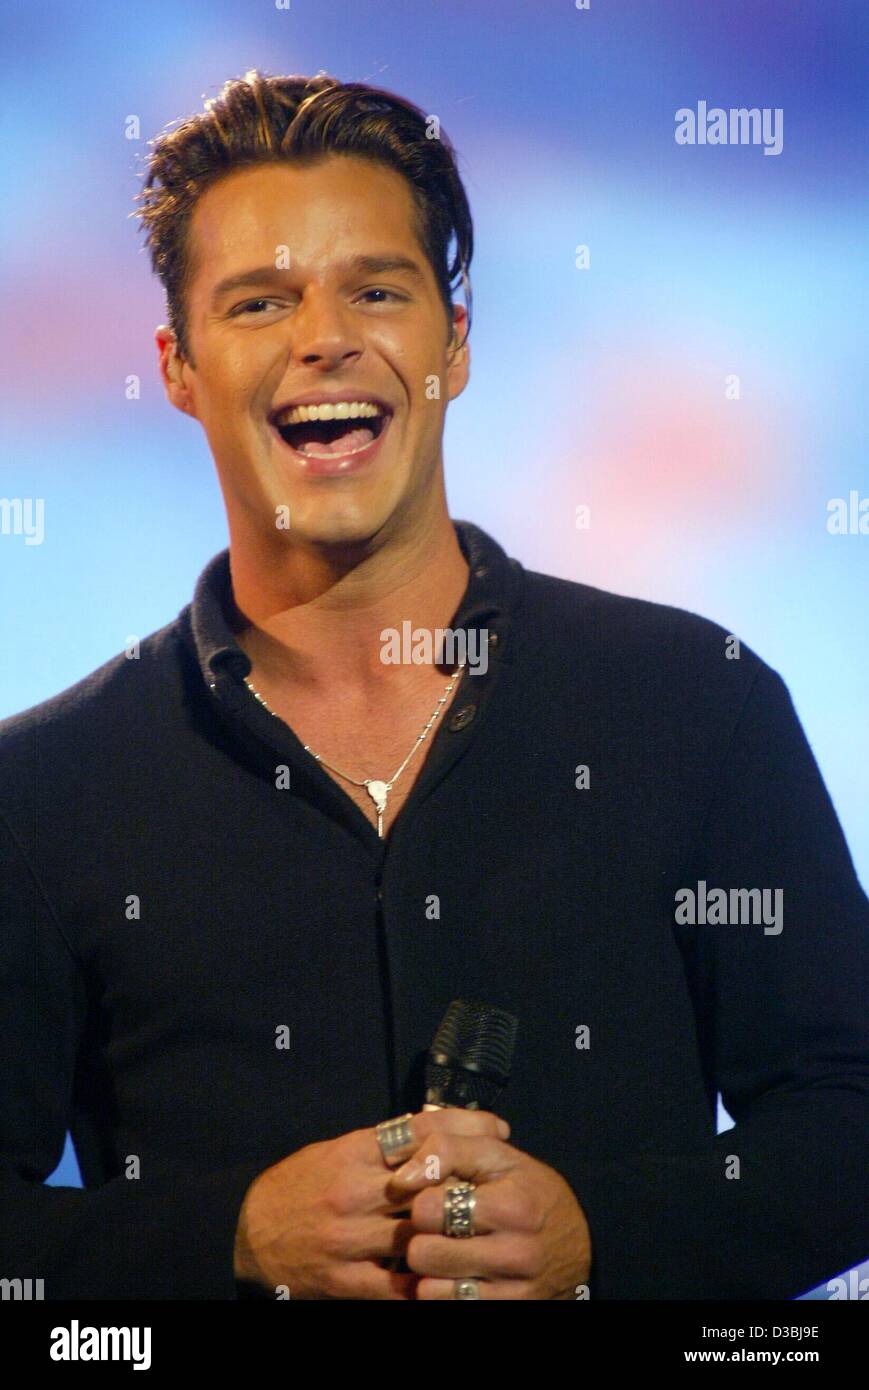 (dpa) - Puertorican pop singer Ricky Martin smiles during his performance at the '10th Pavarotti and Friends' charity concert in Modena,Italy, 27 May 2003. Stock Photo